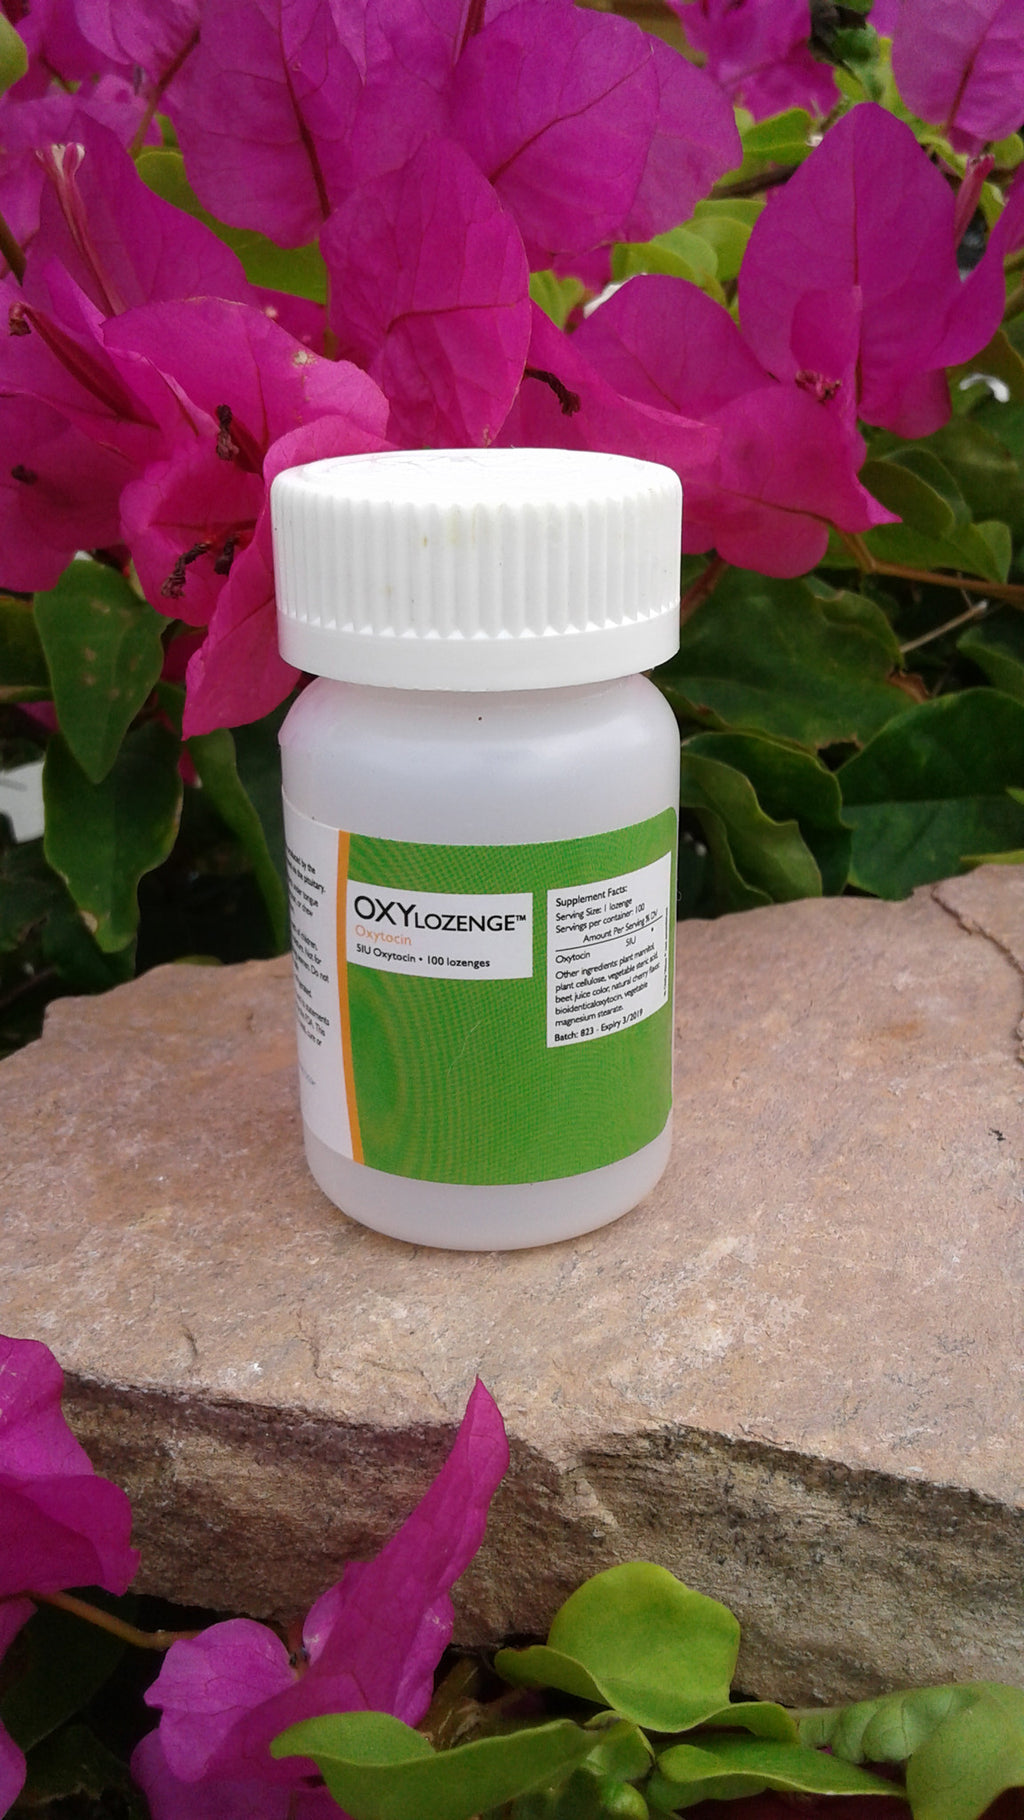 OxyLozenge, the Bonding & Love Amino Acid in a Tablet, Wholesale Price: $89 per bottle with a 5 bottle minimum order